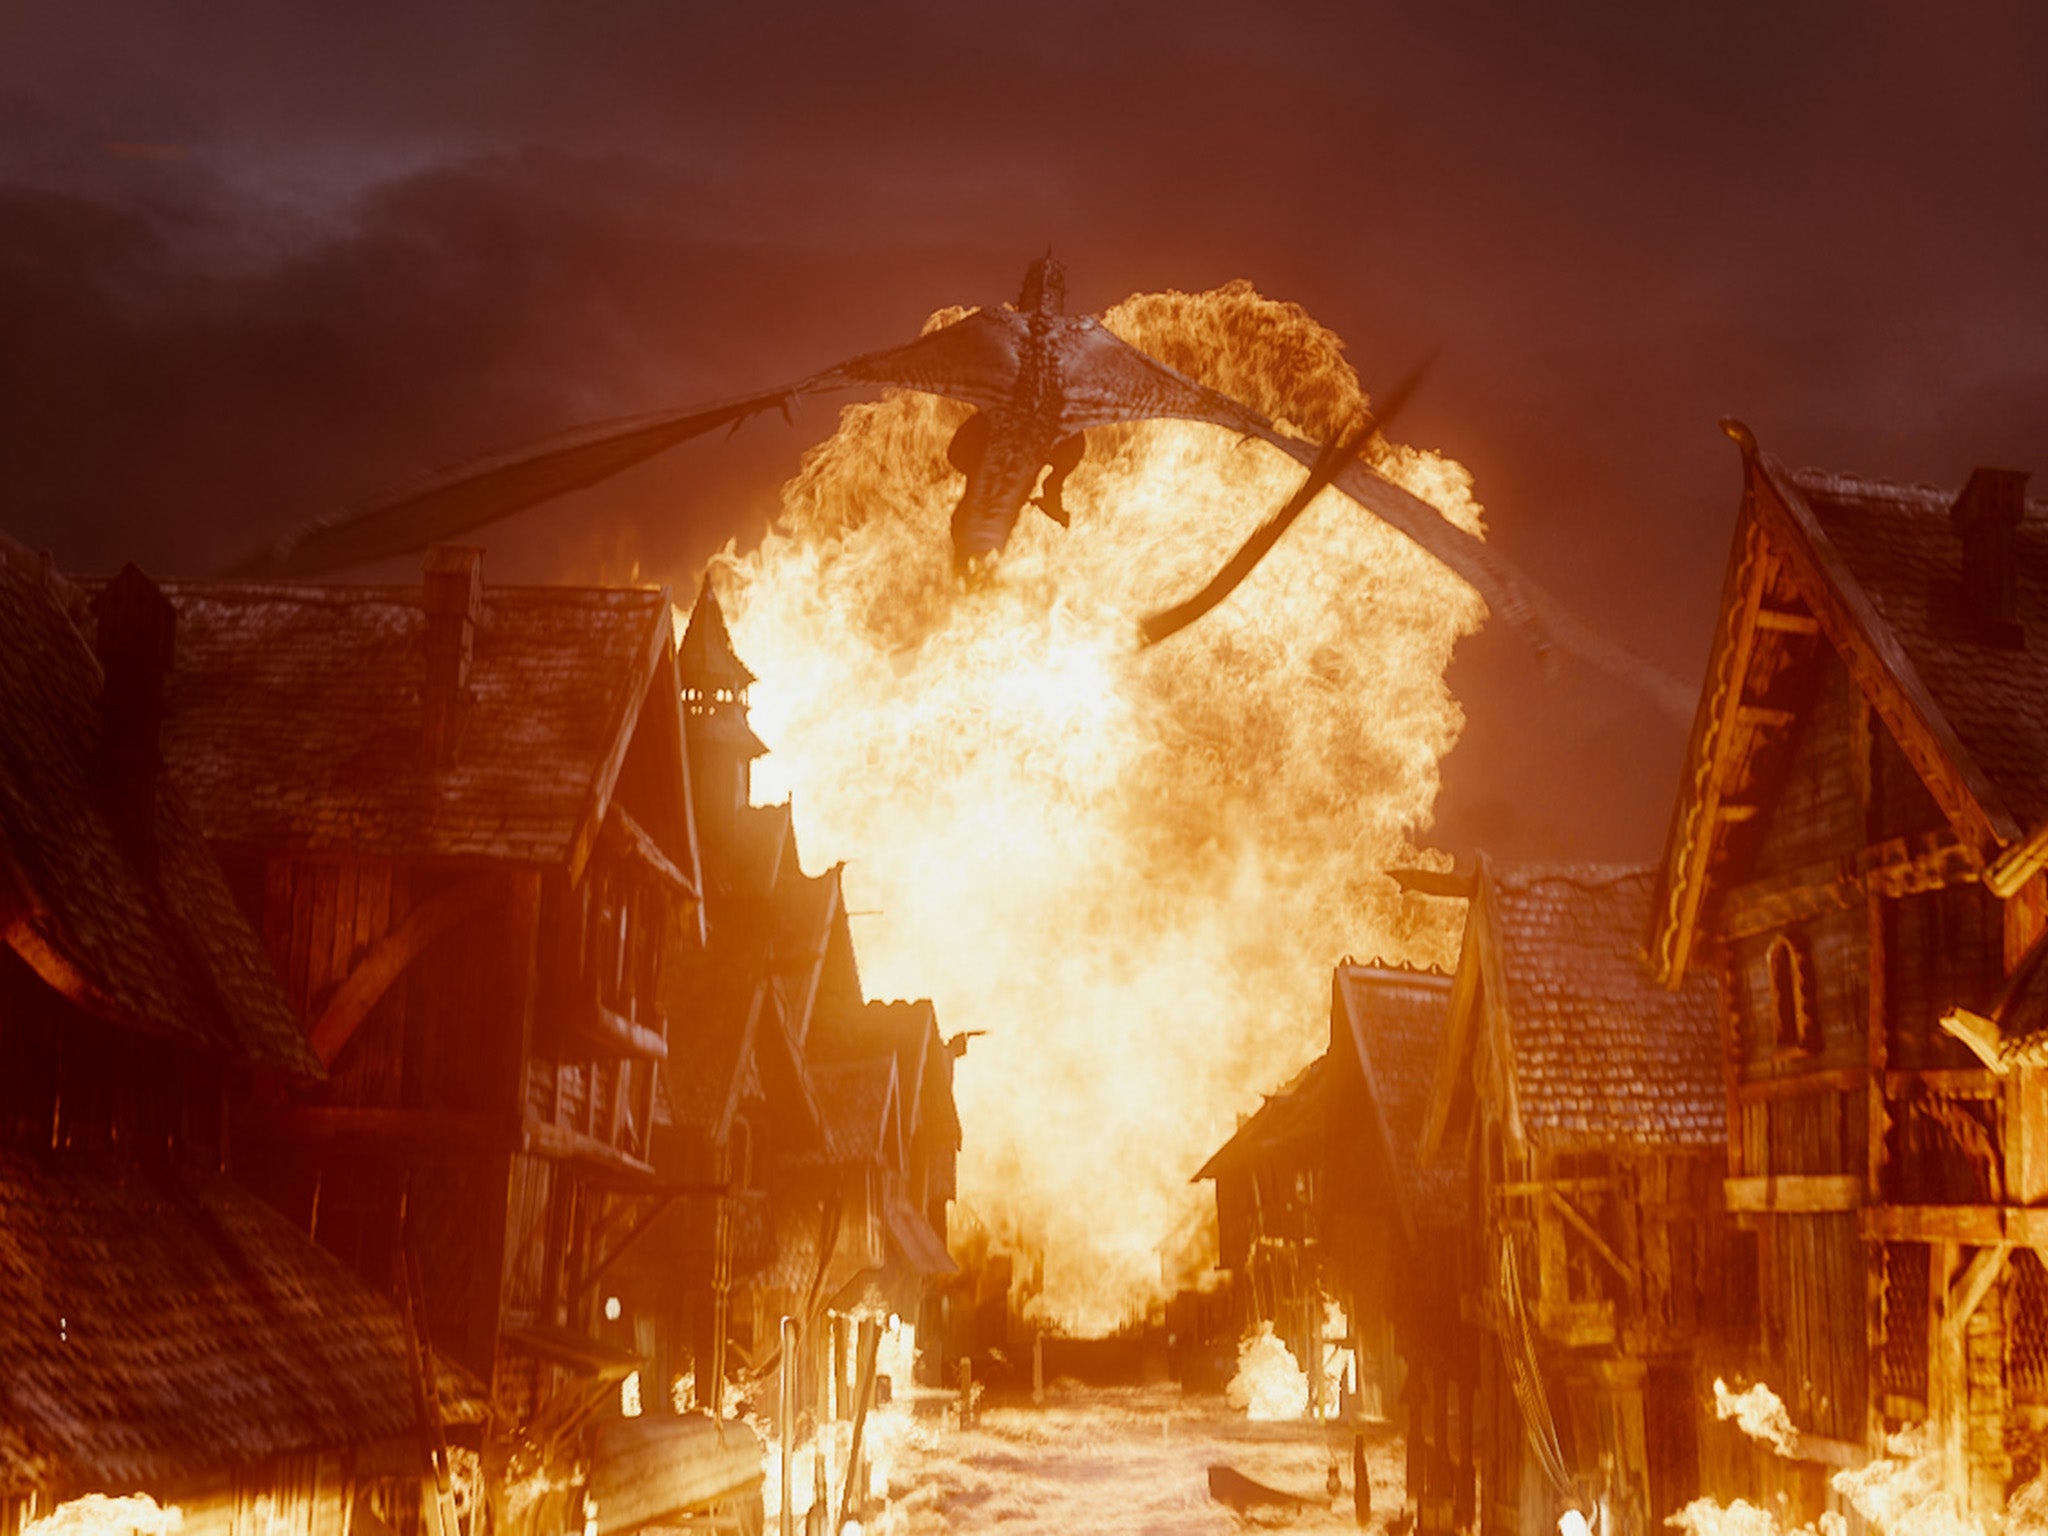 Dragon Smaug wreaks havoc in The Hobbit: The Battle of the Five Armies